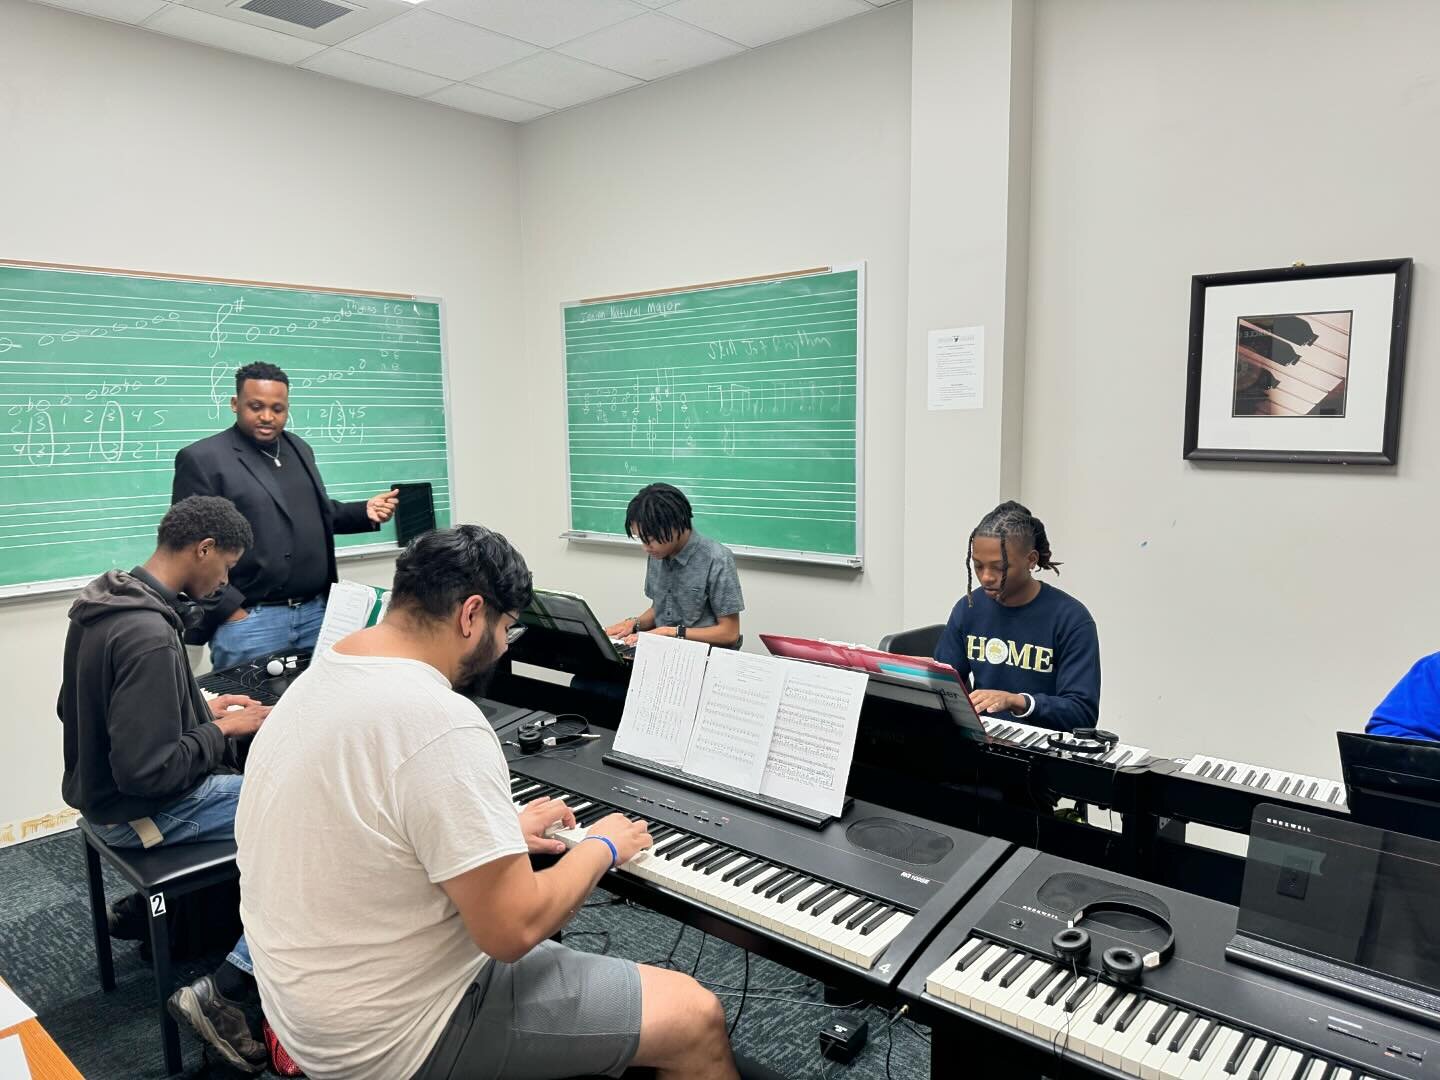 &ldquo;🎶 Embracing the harmony of education 🎵 Stillman&rsquo;s Department of Fine Arts, Music and Language education nourishes the soul through the power of music. #MusicEducation #FineArts #StillmanCollege&rdquo;